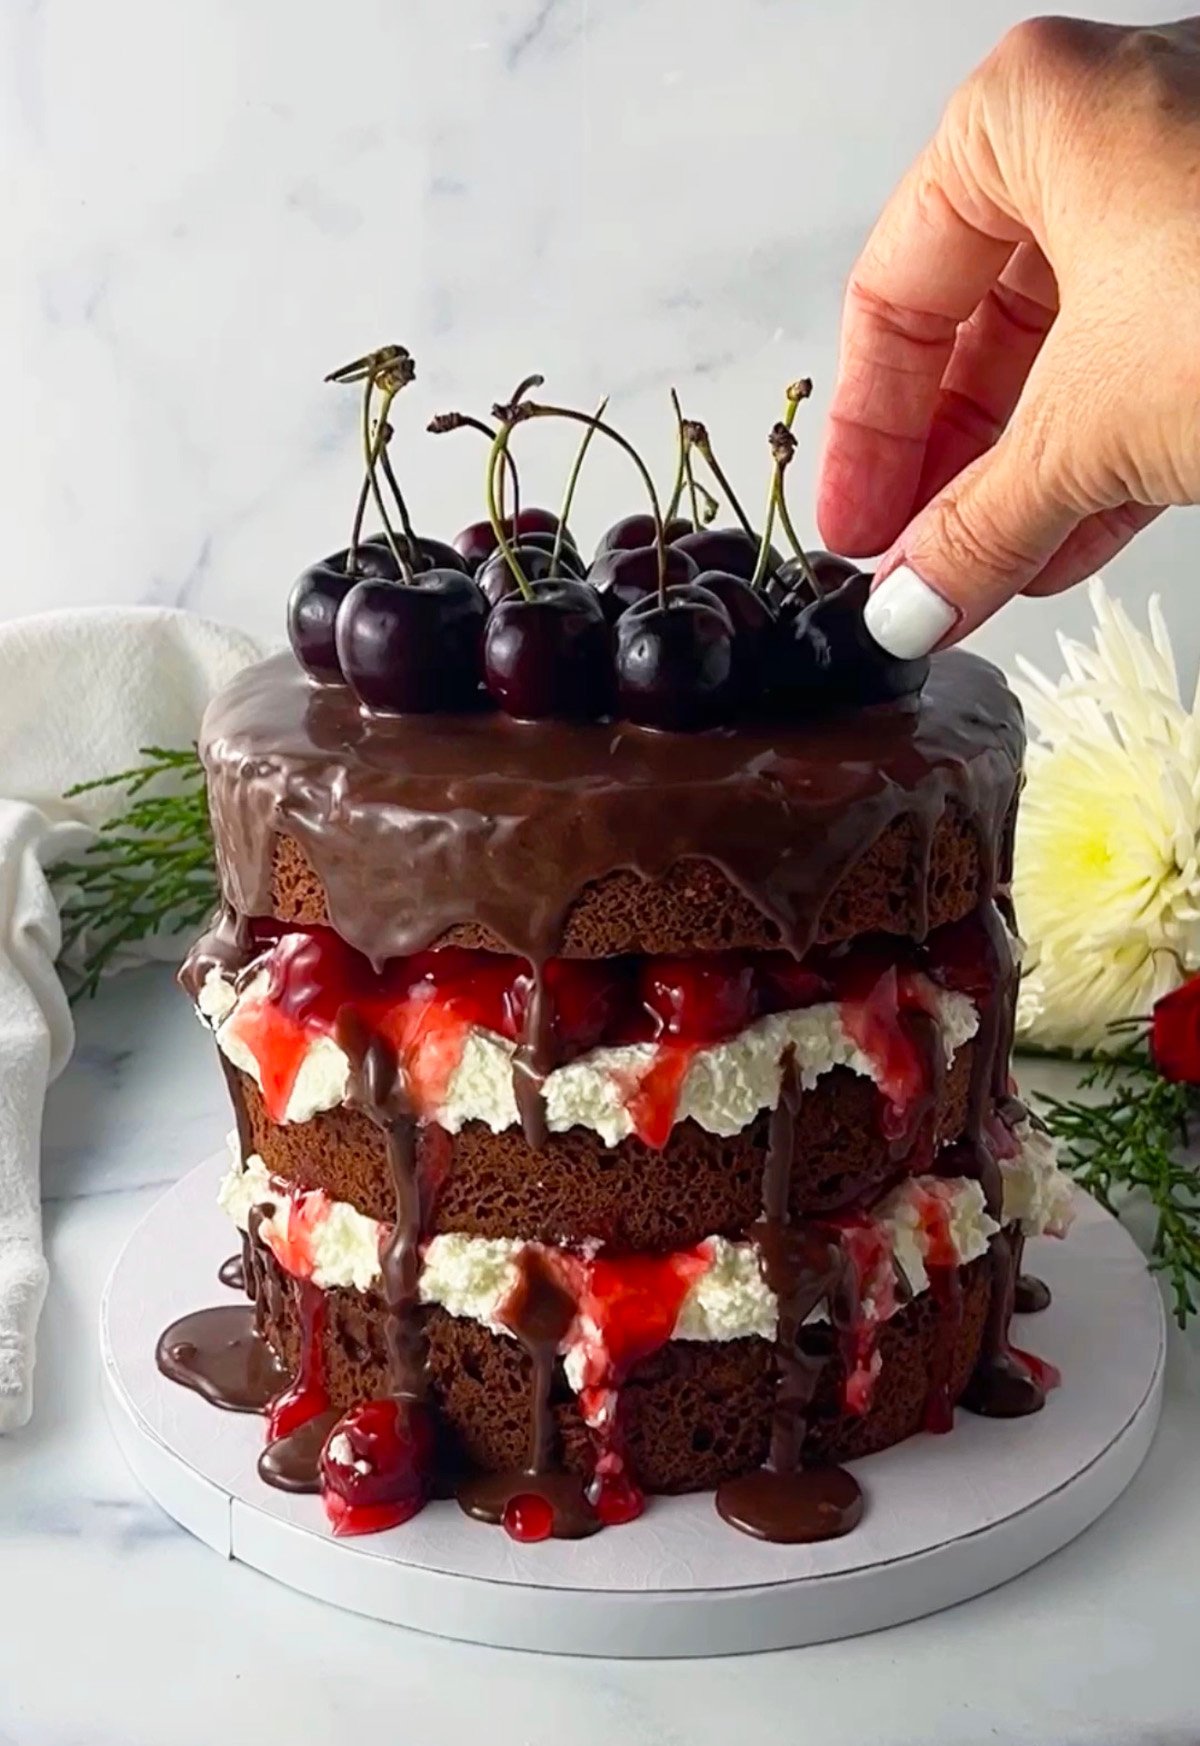 Placing fresh cherries on top of chocolate ganache drizzled black forest cake.